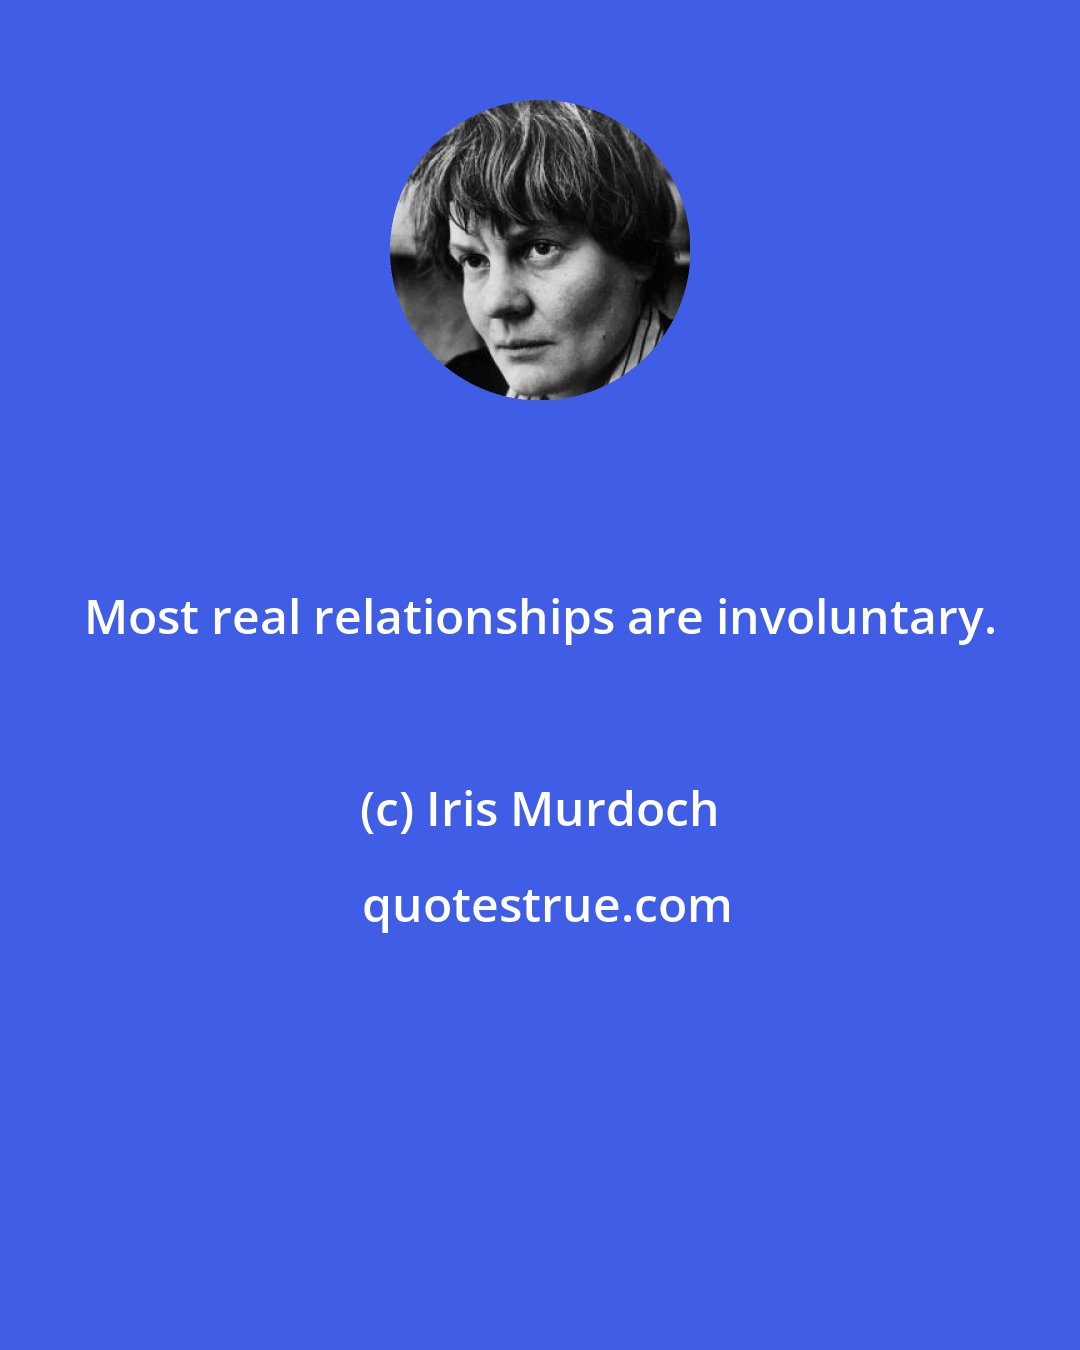 Iris Murdoch: Most real relationships are involuntary.